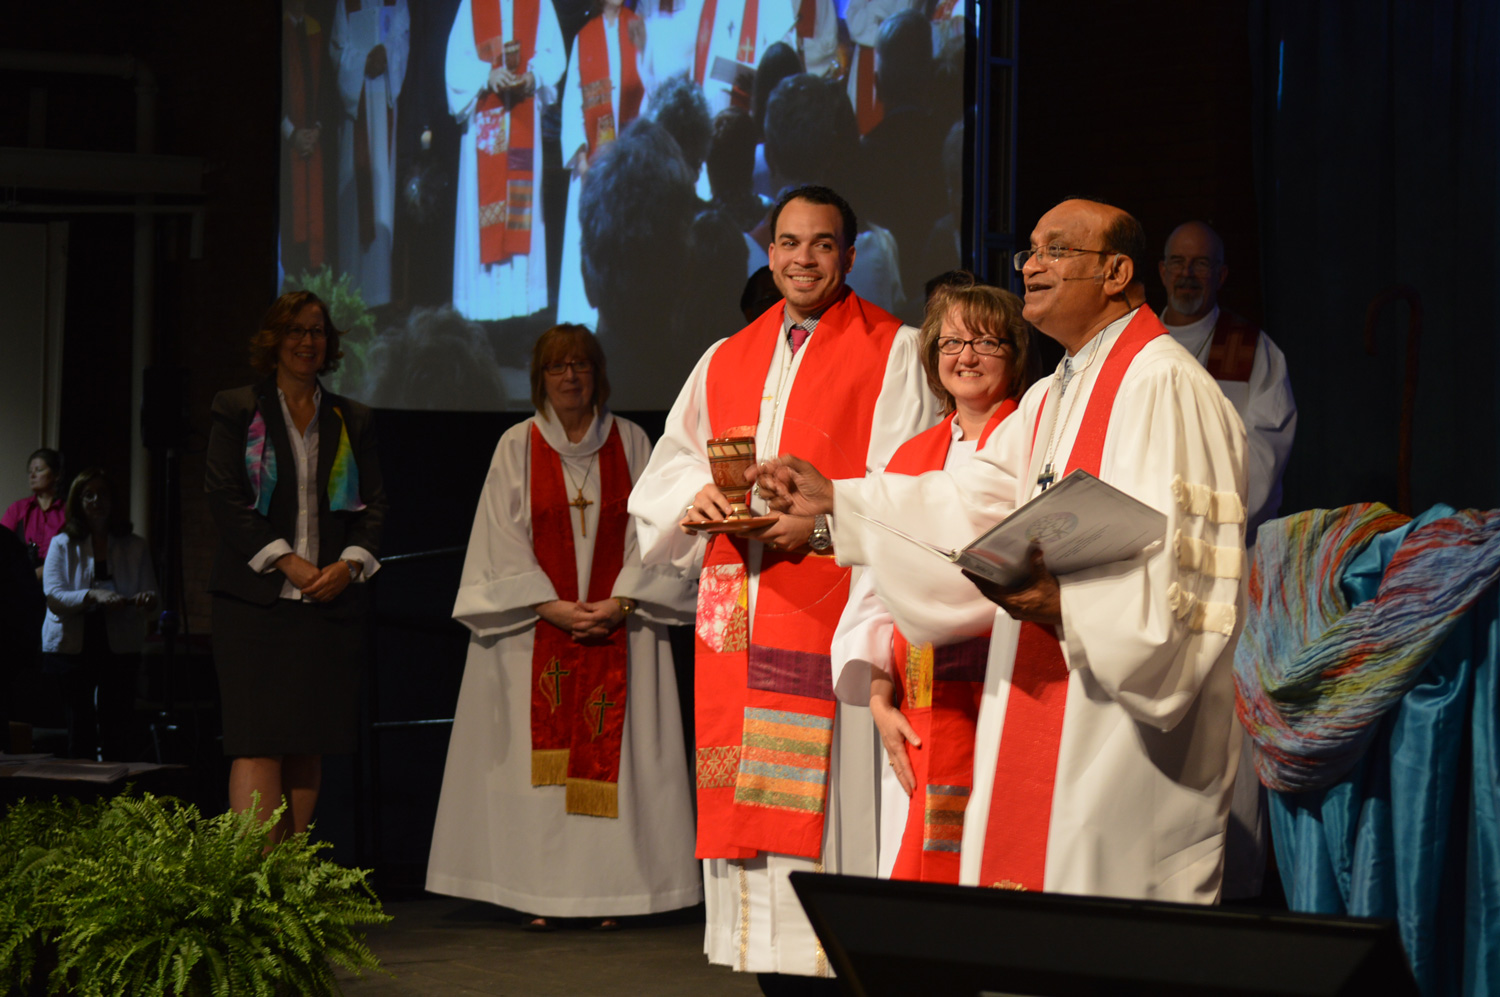 One of the first things many new clergy do after their ordination is help serve communion during the ordination worship service. Photo by Beth DiCocco, New England Conference.